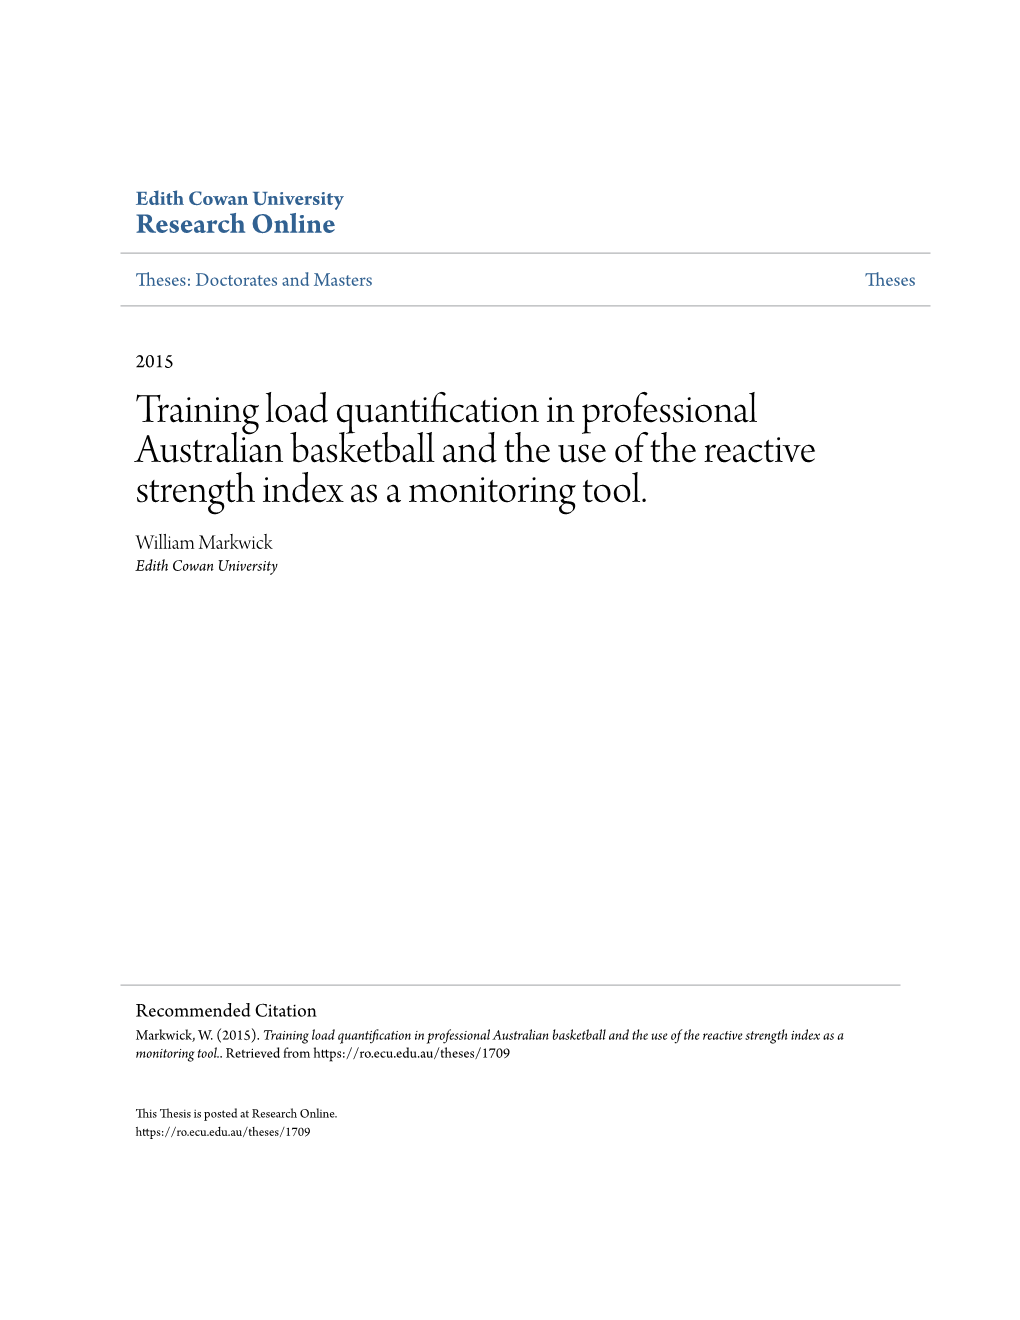 Training Load Quantification in Professional Australian Basketball and the Use of the Reactive Strength Index As a Monitoring Tool